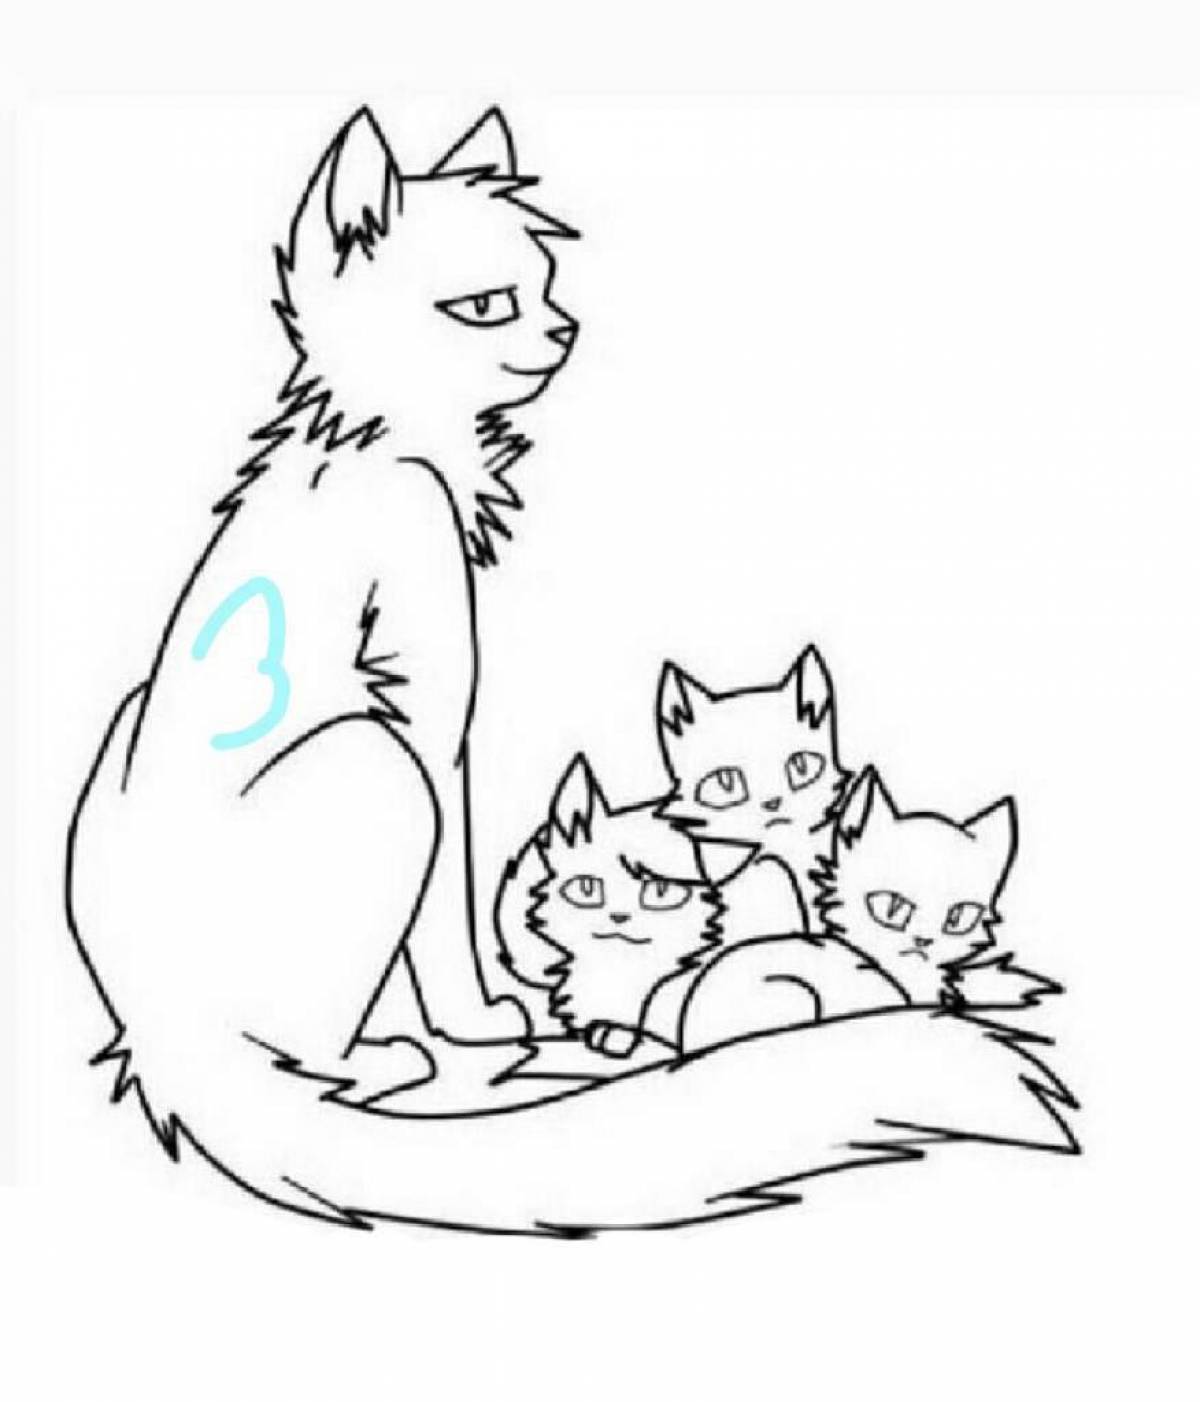 Lana's Cat Animated Coloring Page